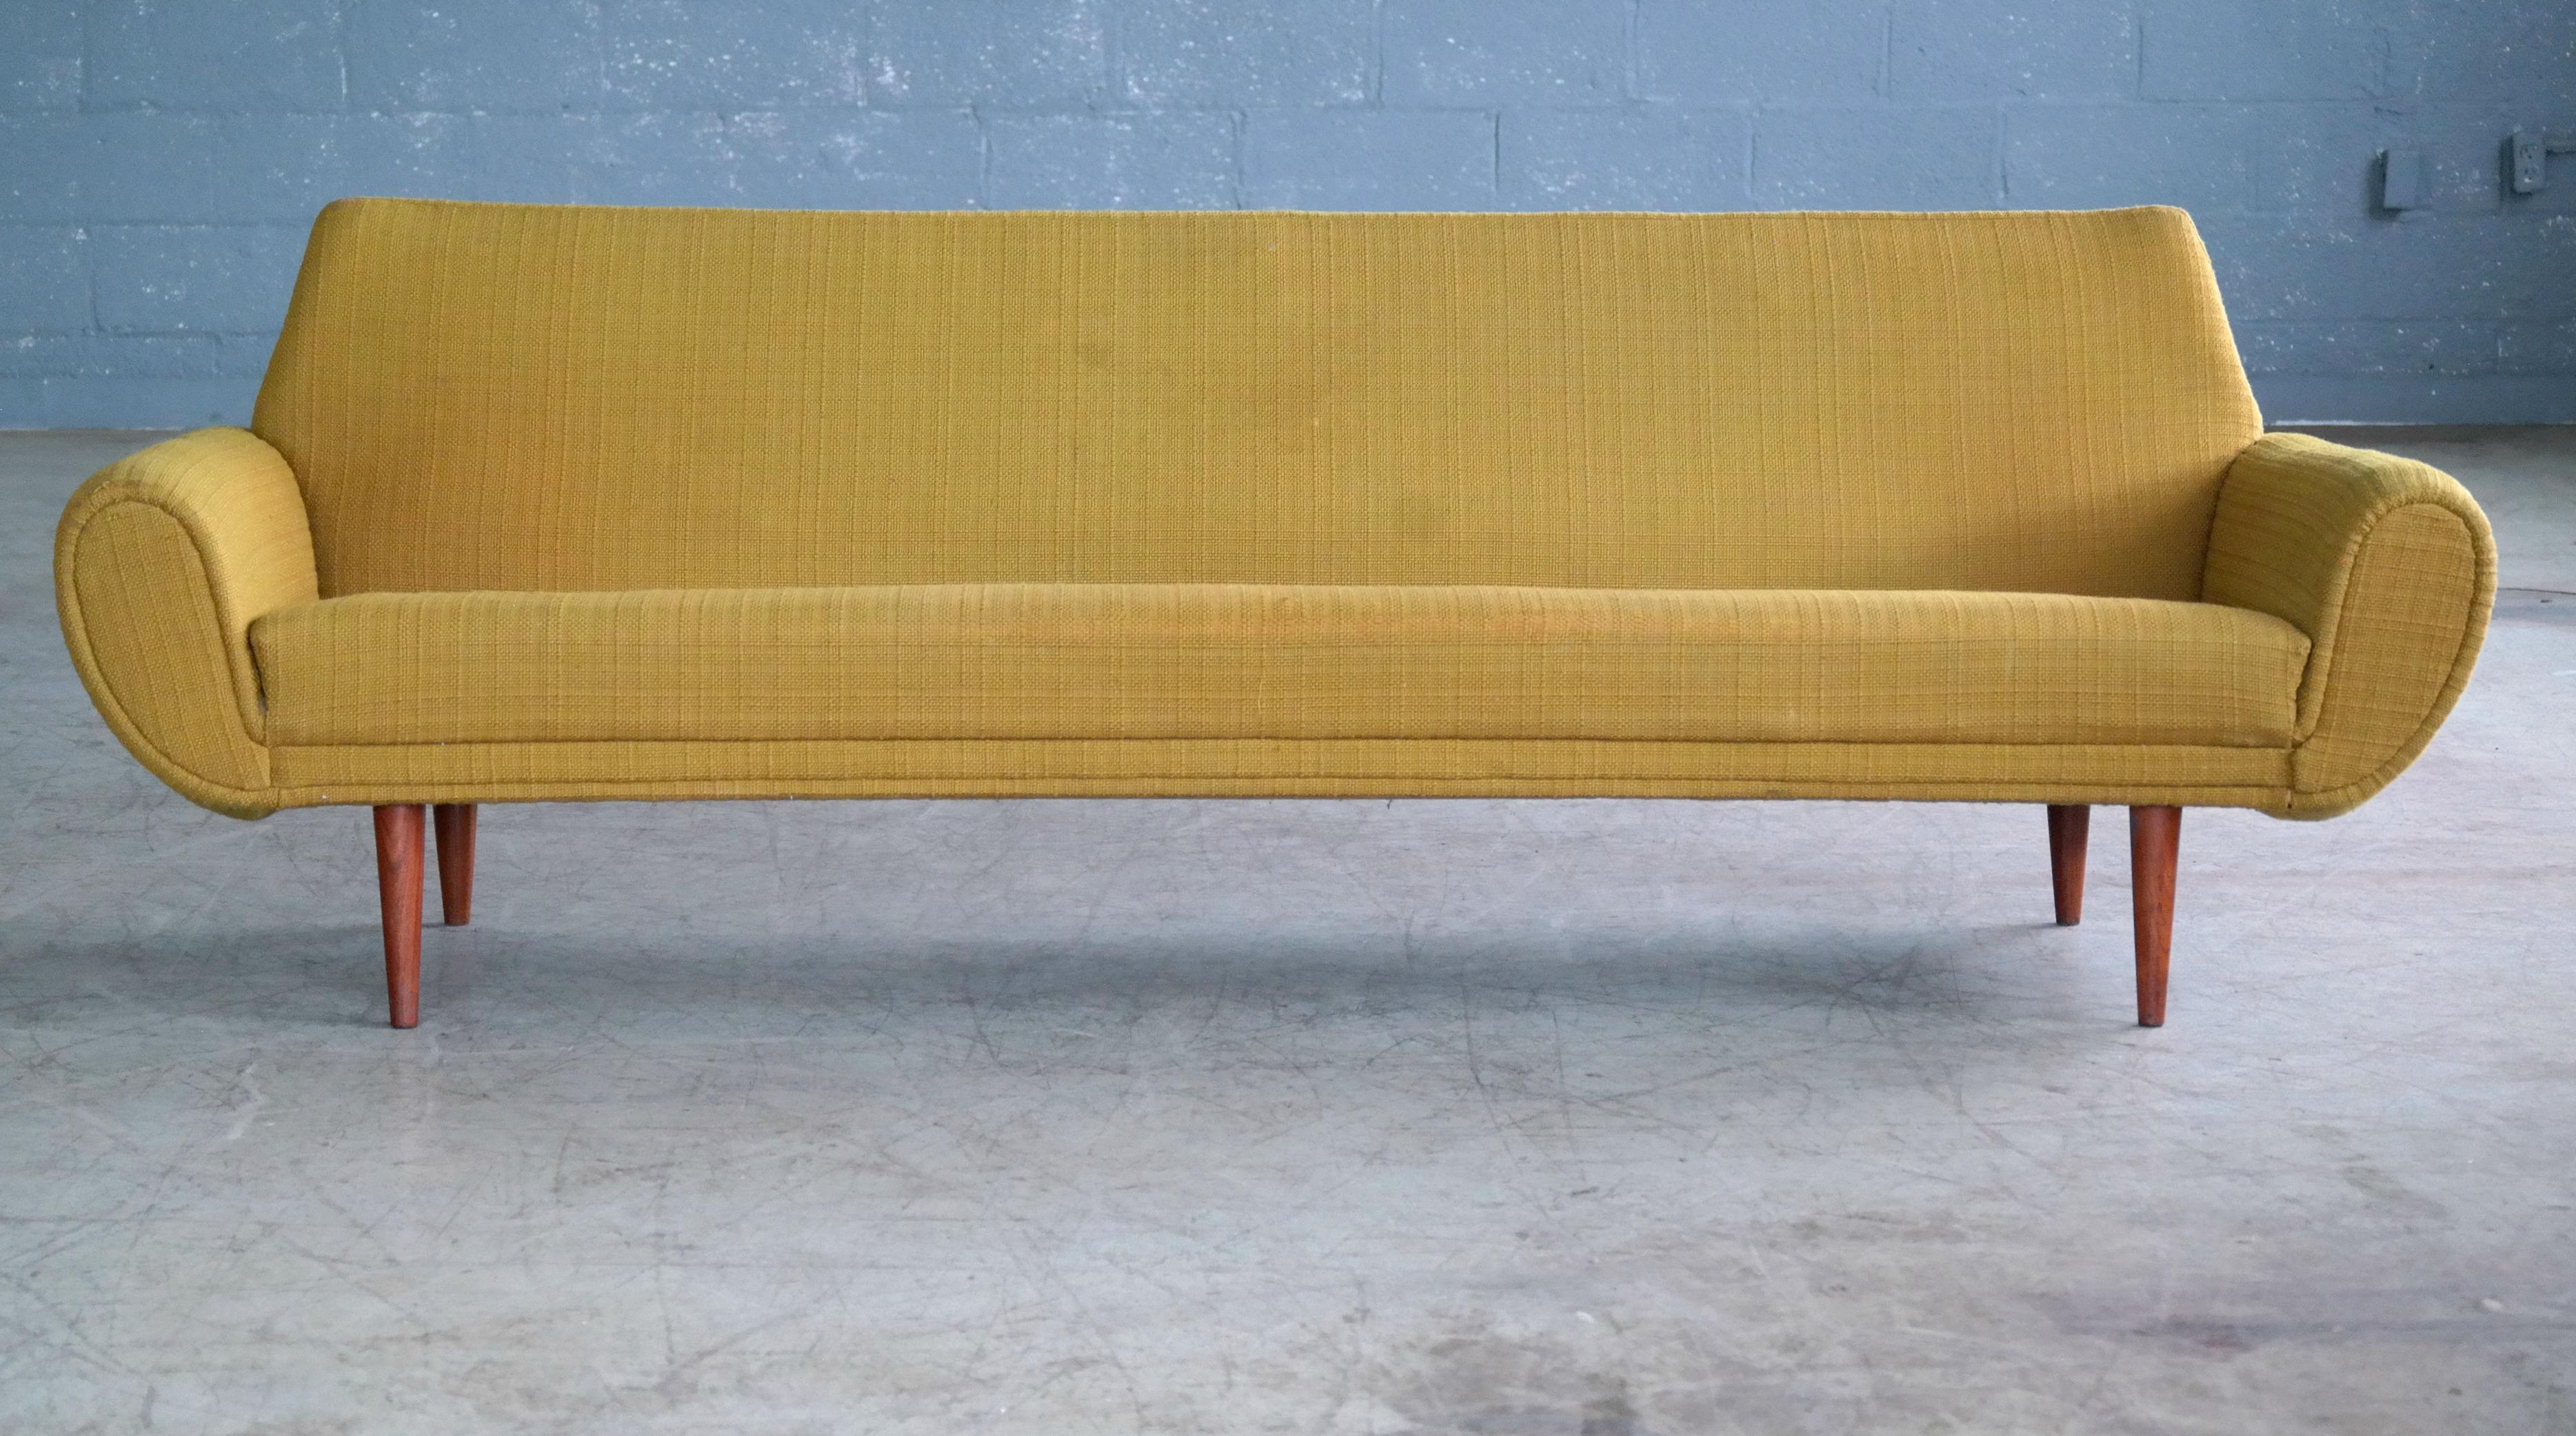 Very cool sofa designed by Kurt Ostervig and manufactured in the early 1960s. Classic 1960s design with low elegant lines and yet enough of a presence to anchor a living room. Covered in its original yellow wool fabric and raised on legs of solid